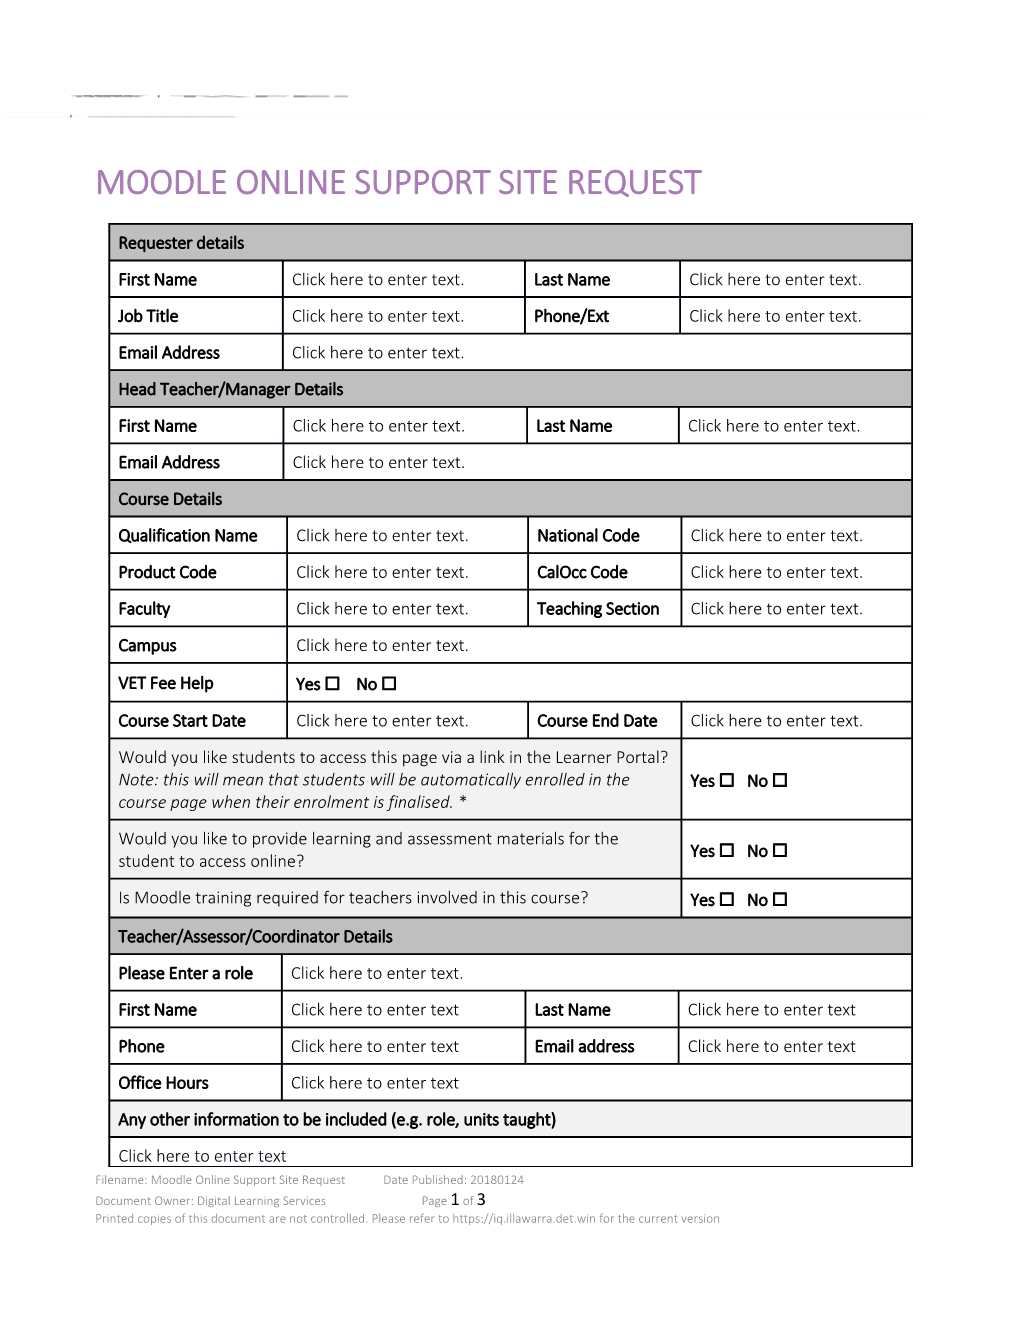 Moodle Online Support Site Request